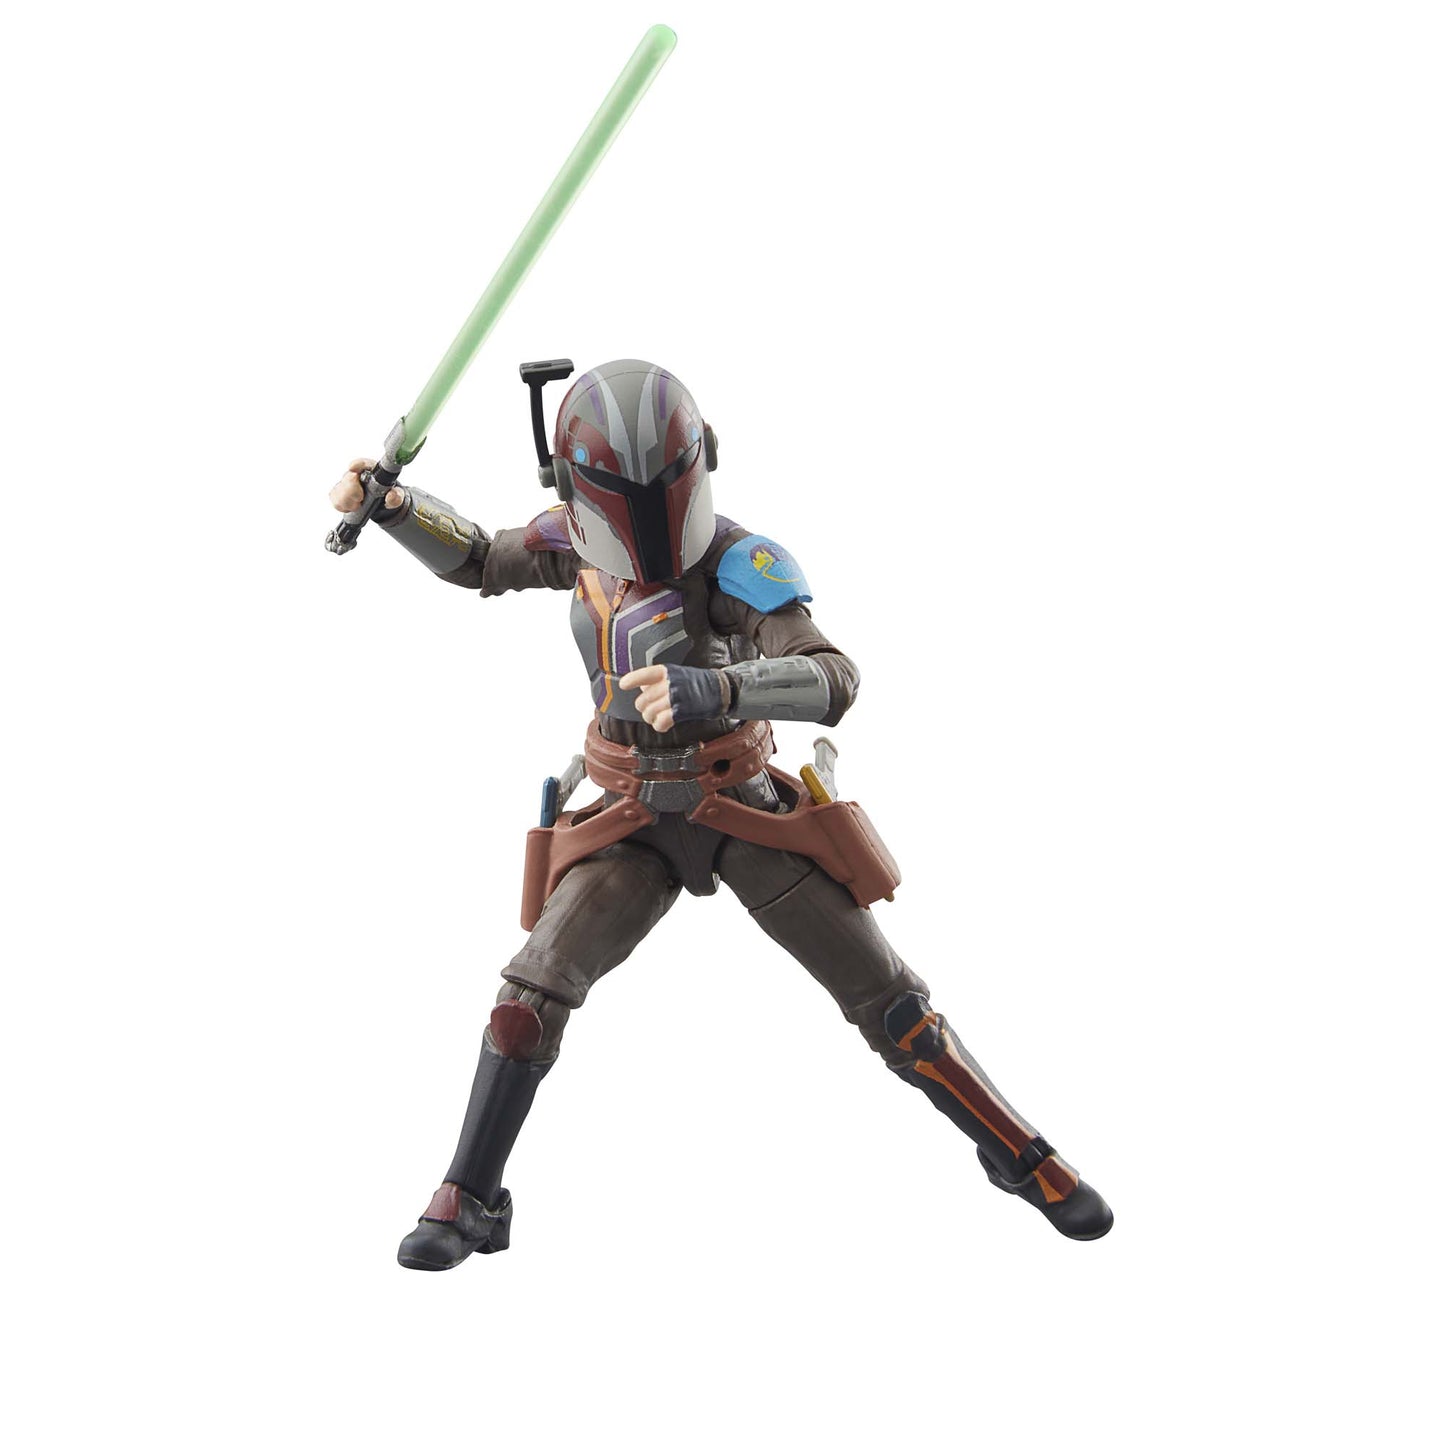 Star Wars The Vintage Collection Sabine Wren Action Figure Toy with light saber - Heretoserveyou